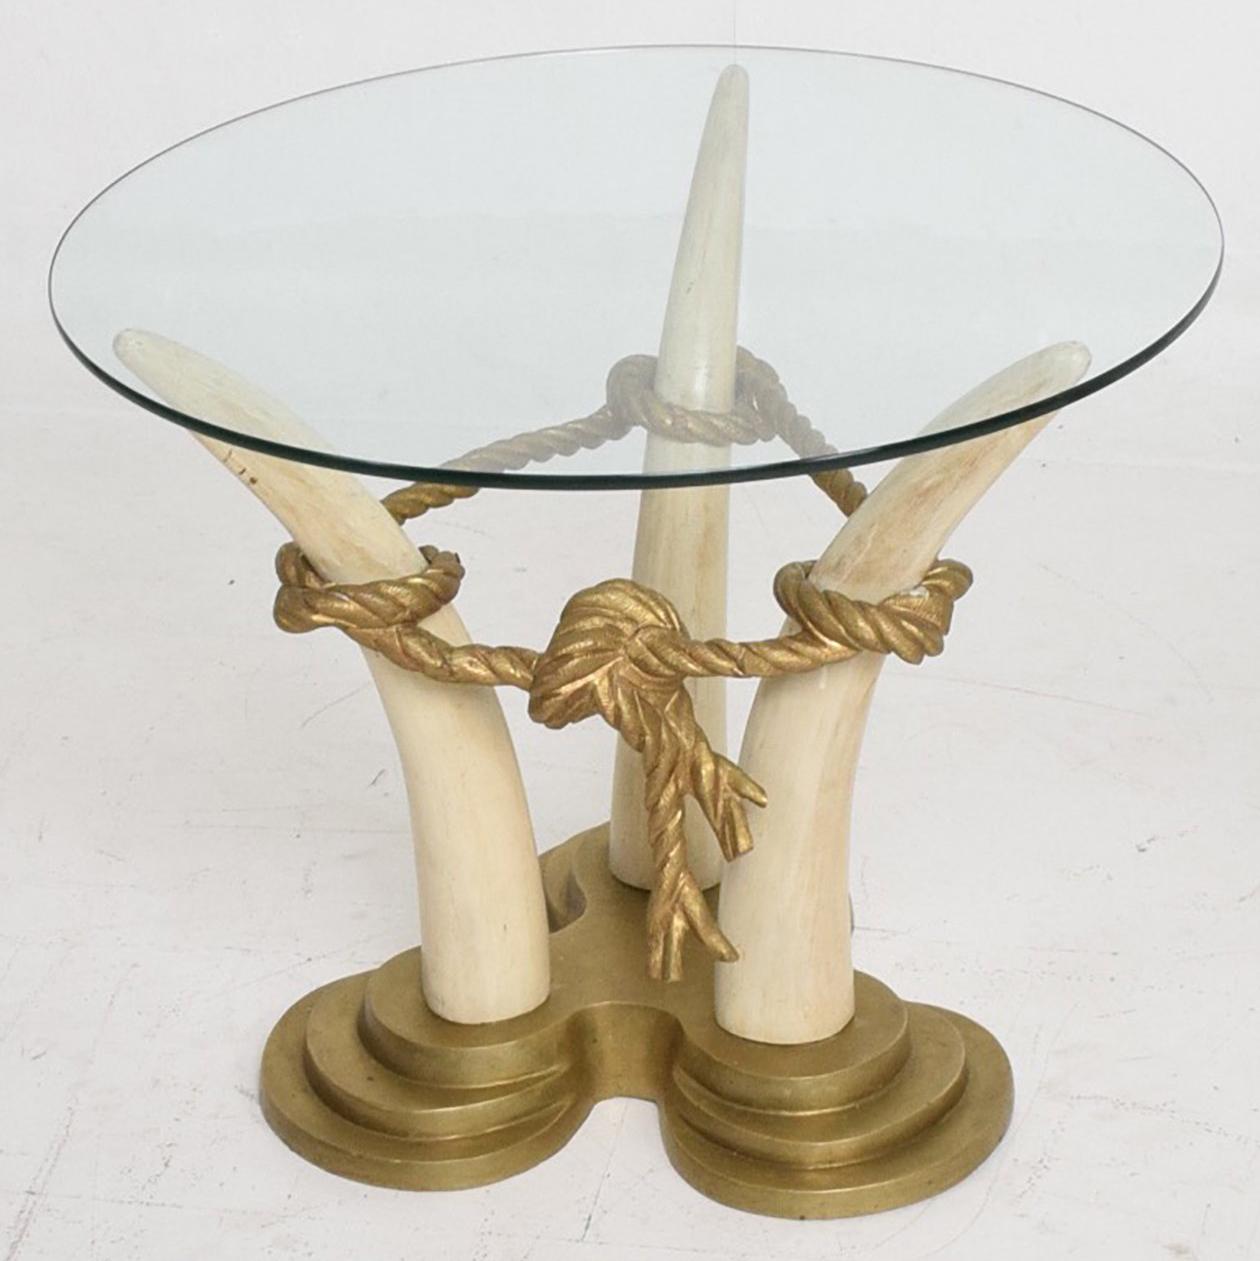 For your consideration a pair of side tables in bronze and faux ivory with glass tops.

By Valenti, Spain
22 1/2